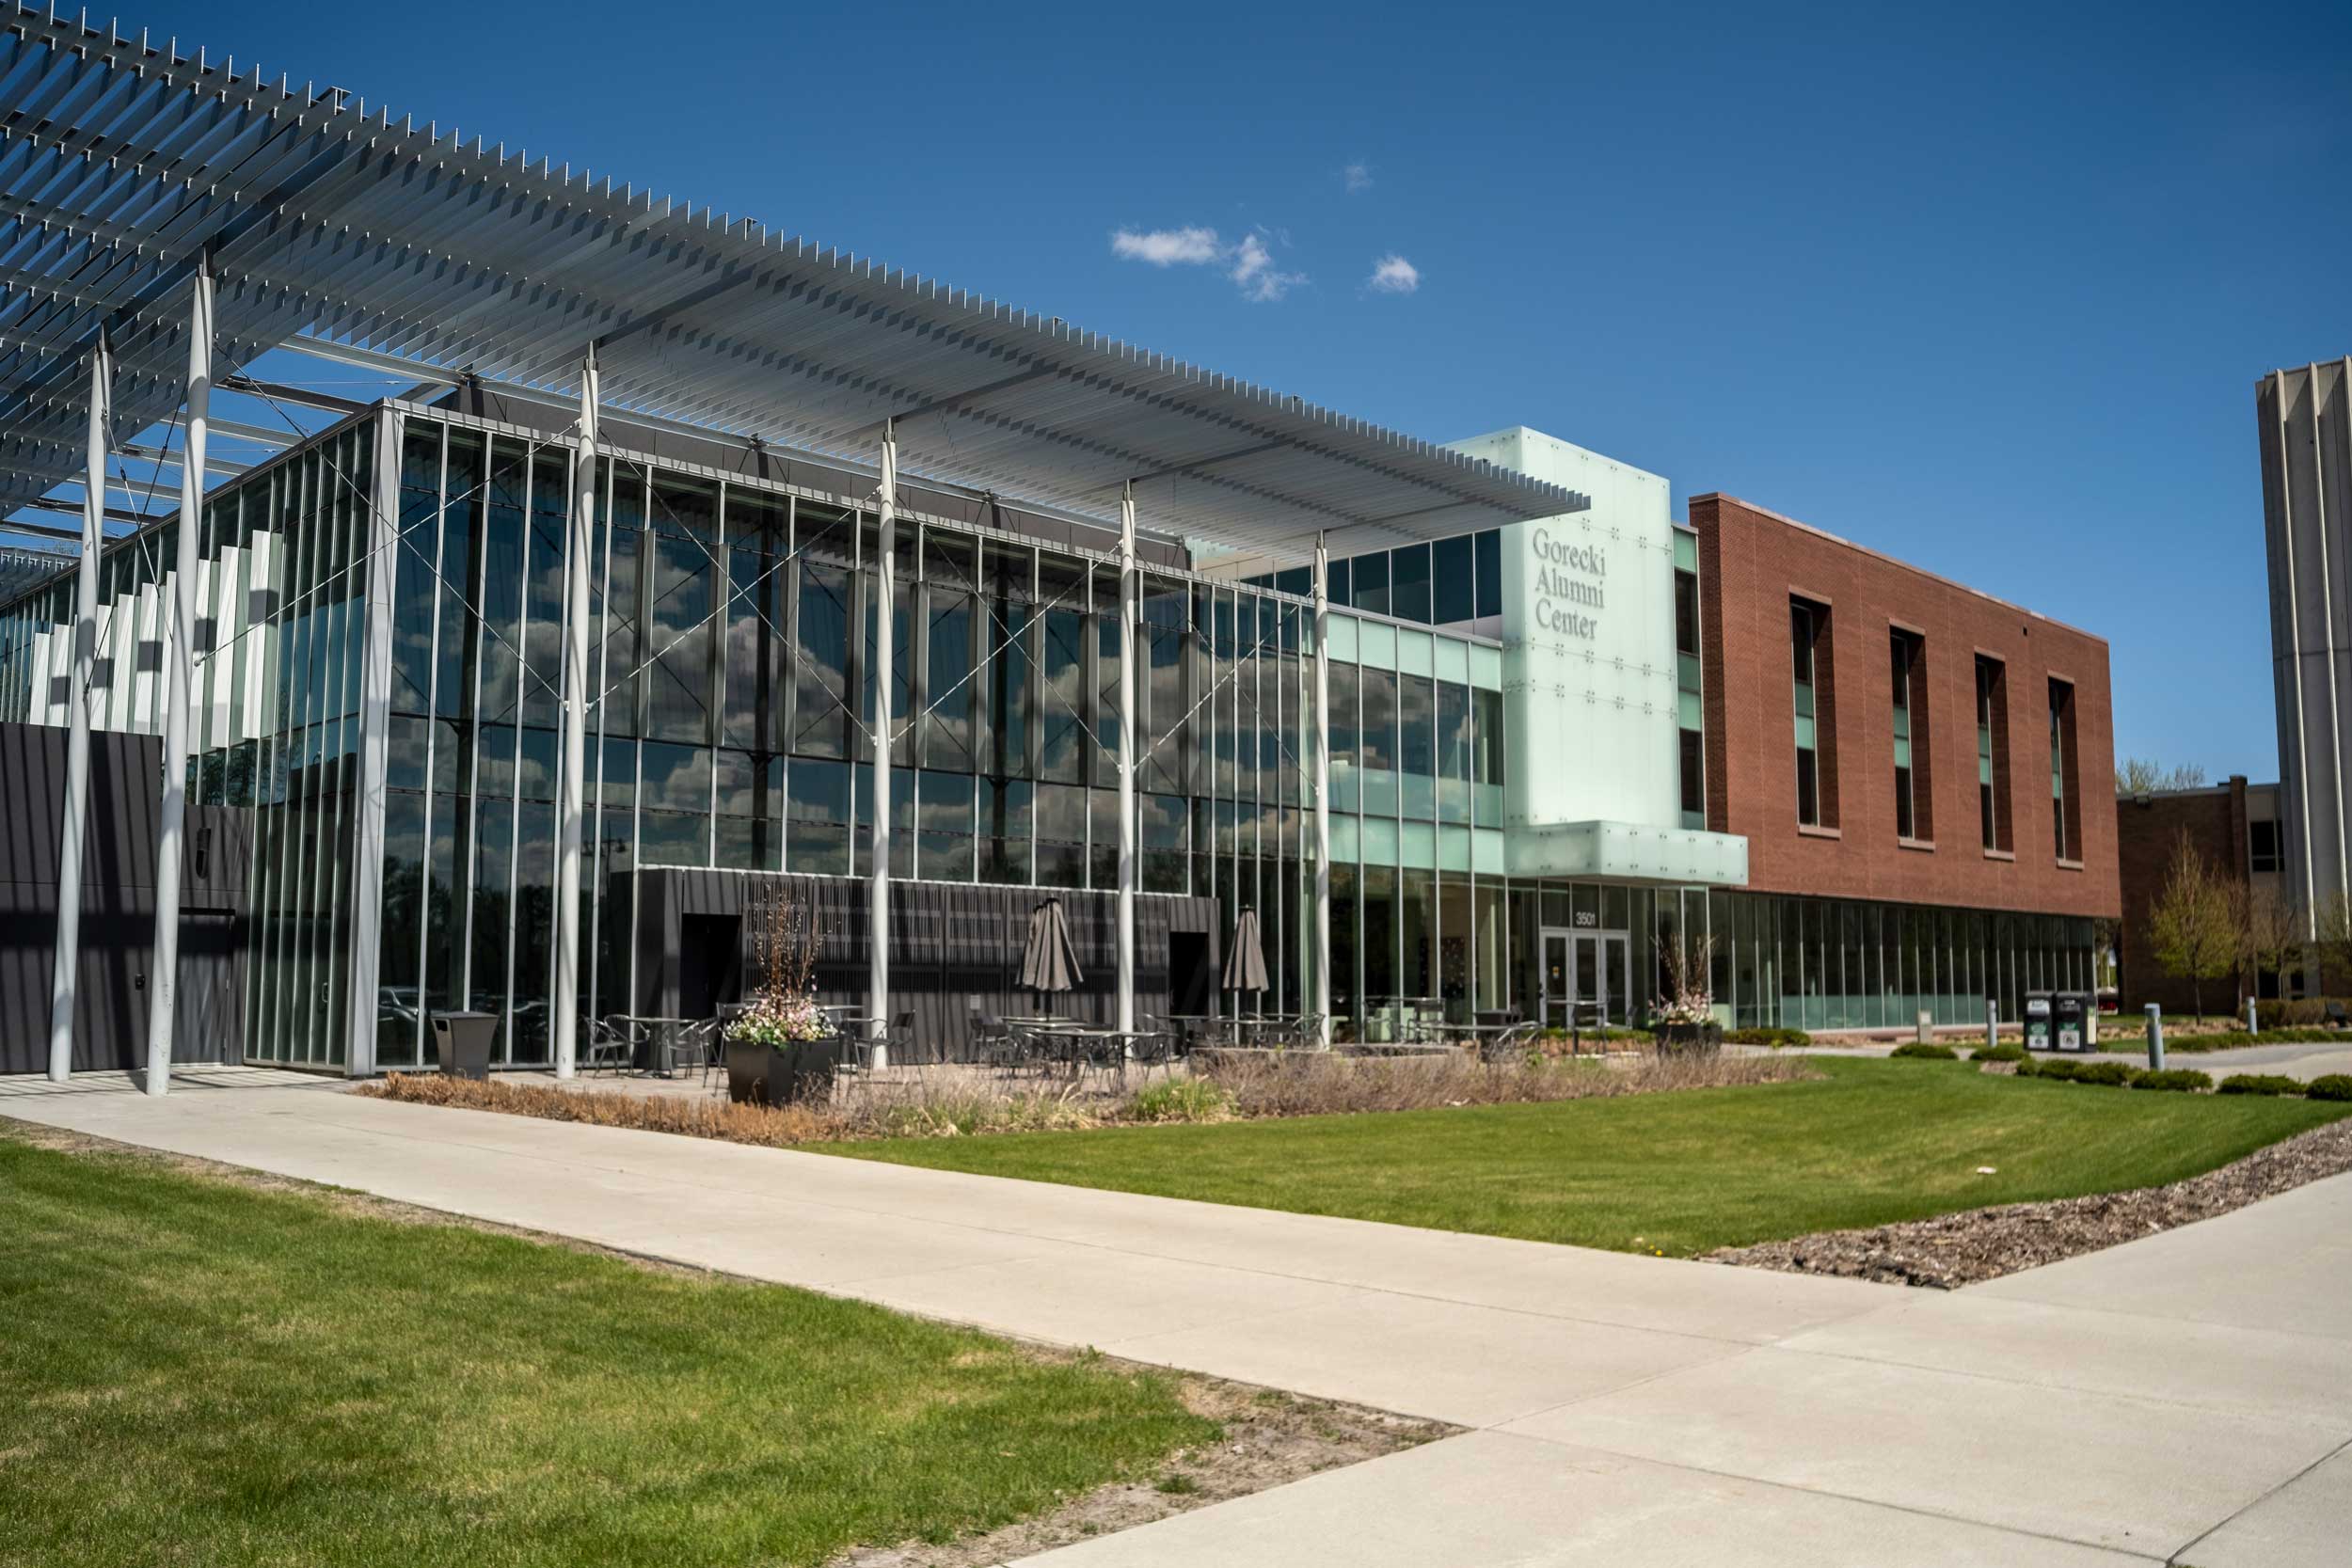 An exterior image of the Gorecki Alumni Center at the University of North Dakota in Grand Forks, ND.